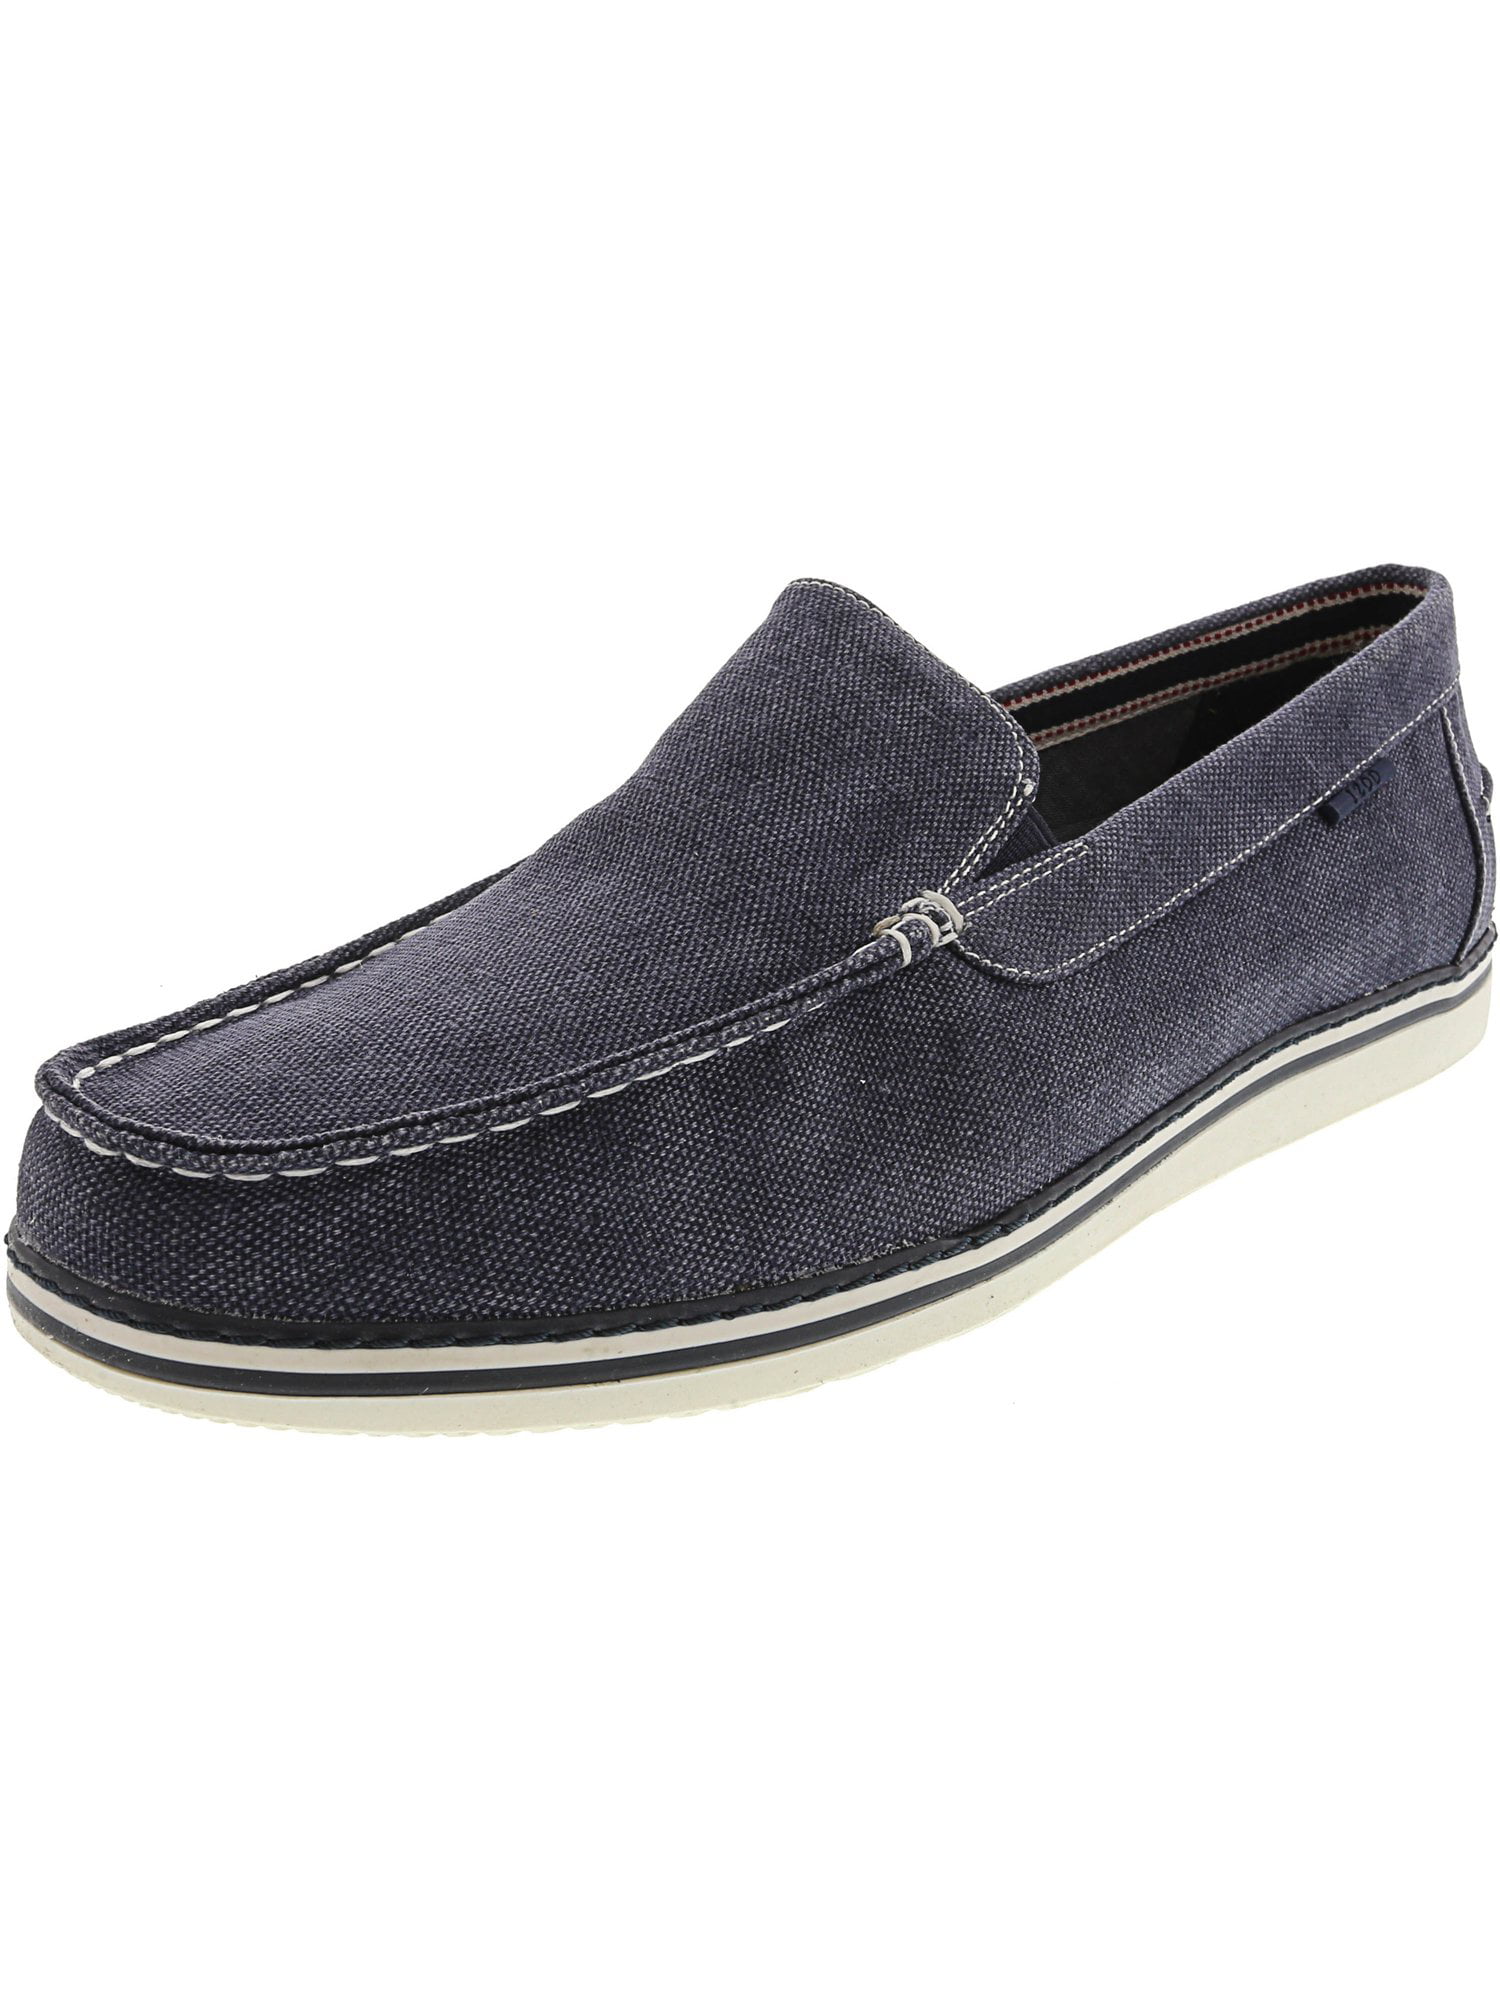 Izod Men's Damiano Navy Ankle-High Fabric Slip-On Shoes - 11M | Walmart ...